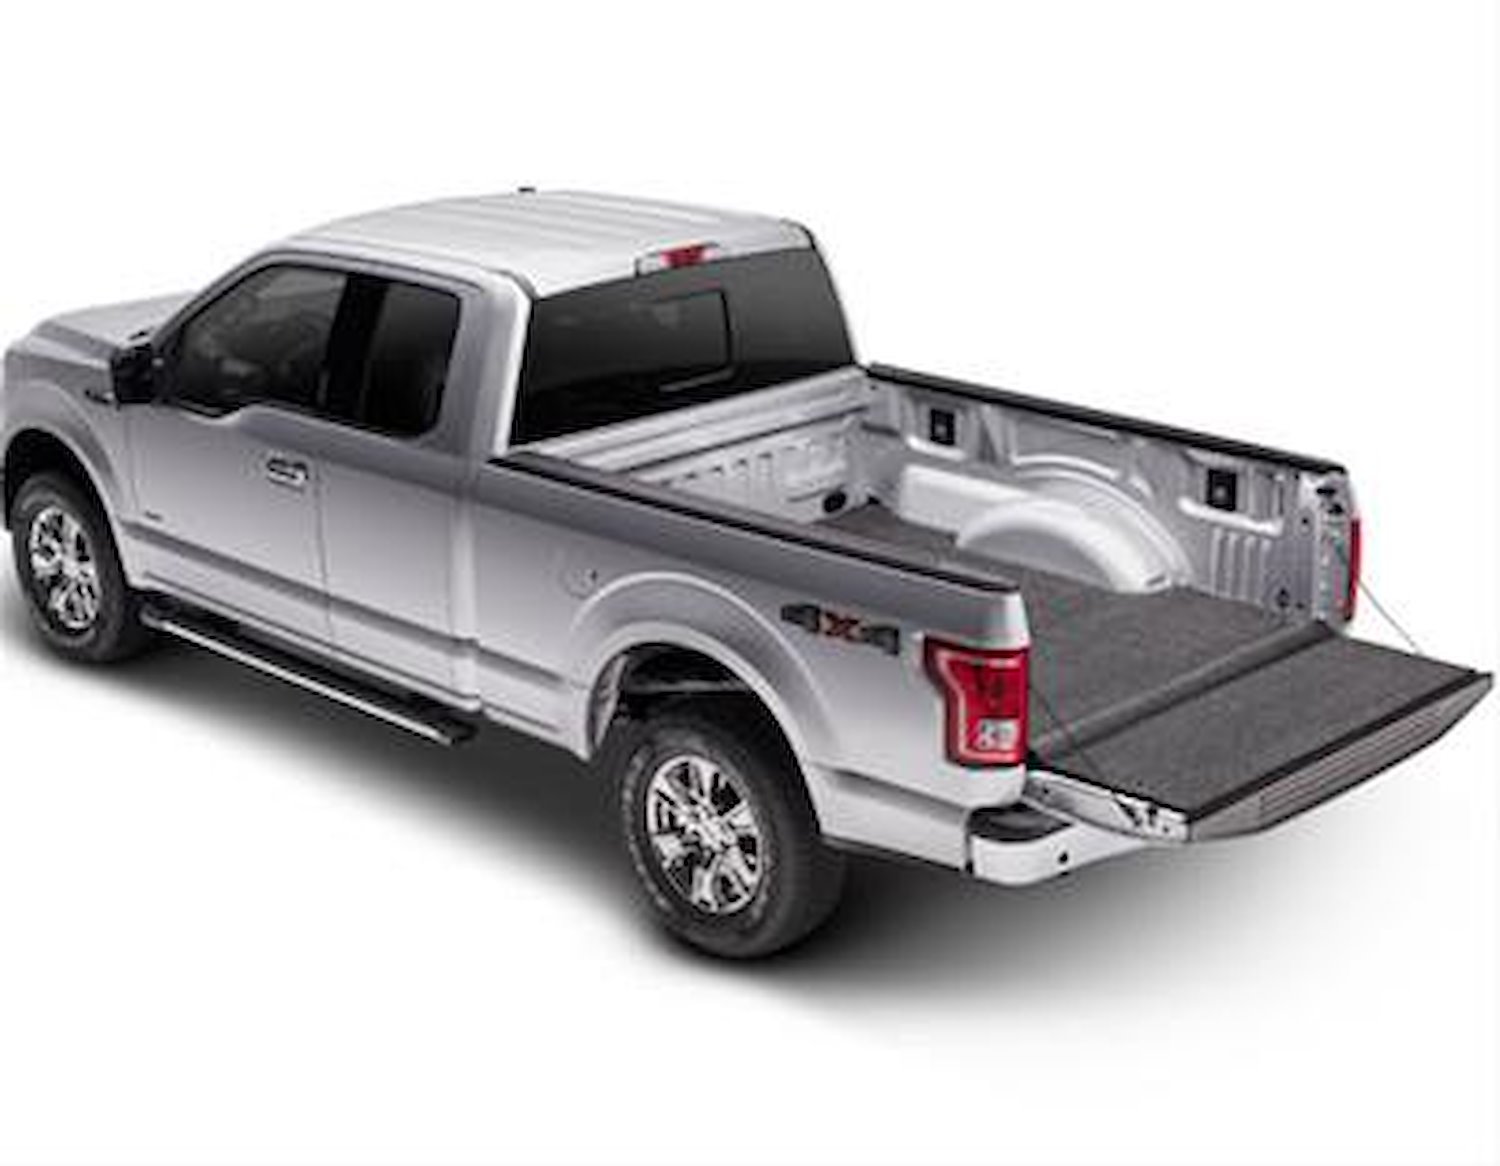 XLTBMQ17LBS XLT BEDMAT FOR SPRAY-IN OR NO BED LINER 17-23 FORD SUPERDUTY 8.0' LONG BED